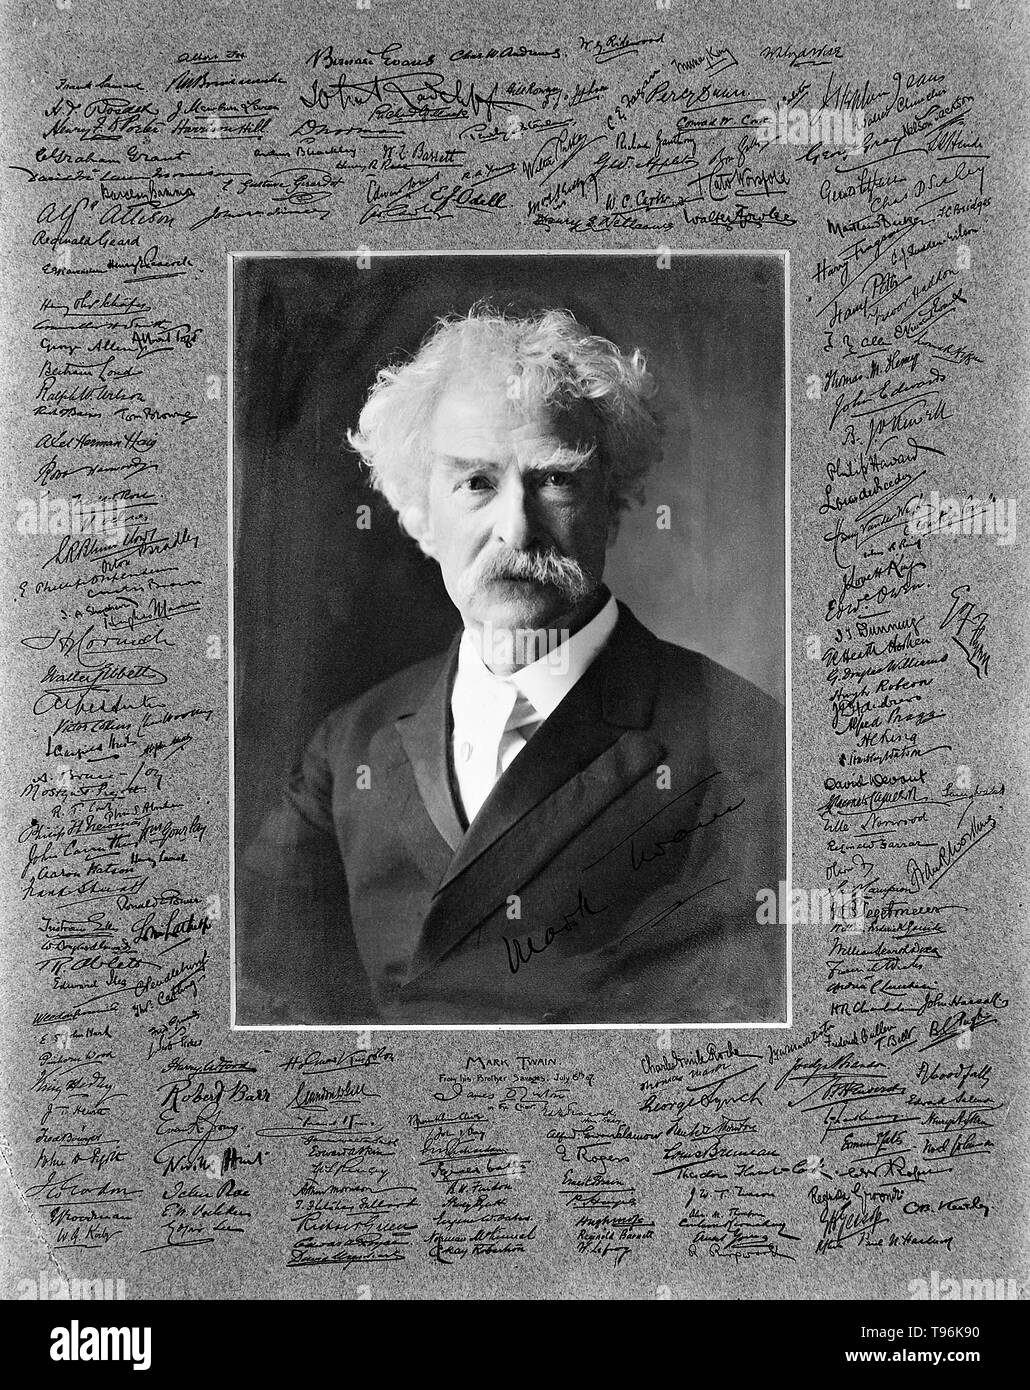 Samuel Langhorne Clemens (November 30, 1835 - April 21, 1910) better known by his pen name Mark Twain, was an American author and humorist. He is most noted for his novels, The Adventures of Tom Sawyer (1876), and its sequel, Adventures of Huckleberry Finn (1885) often called the Great American Novel. He achieved great success as a writer and public speaker. His wit and satire earned praise from critics and peers, and he was a friend to presidents, artists, industrialists, and European royalty. Stock Photo